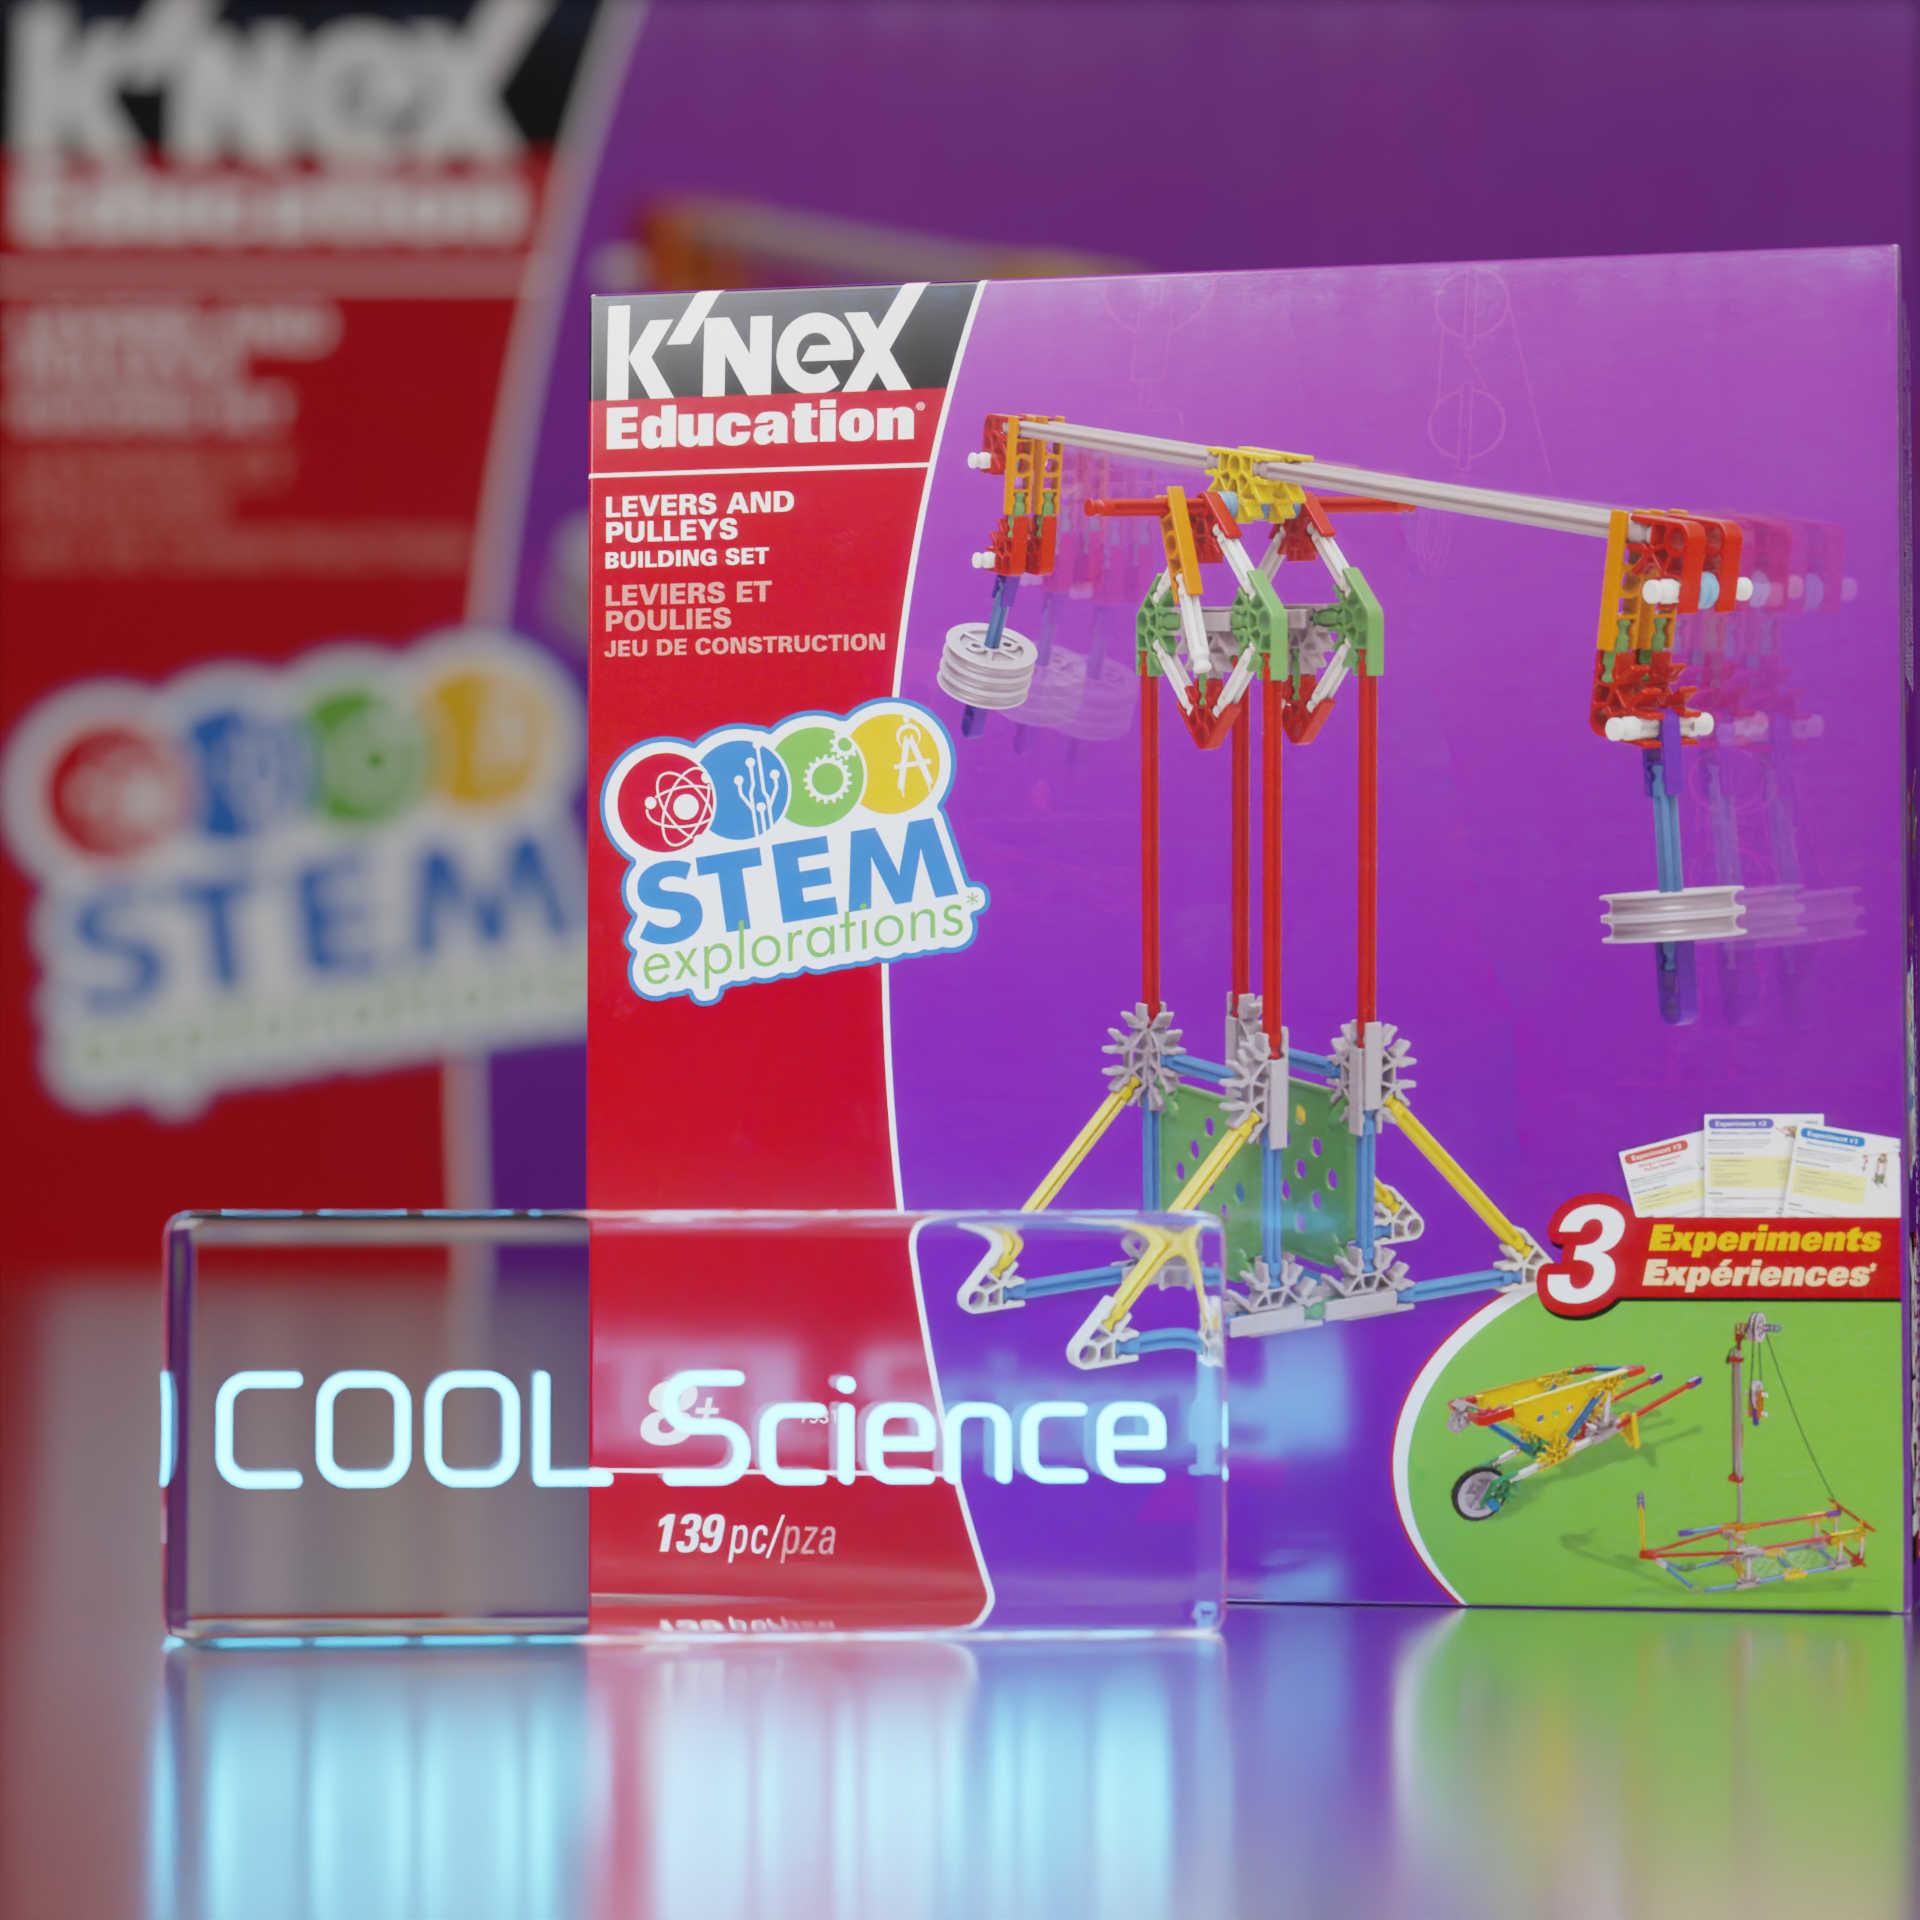 Front View of the K'NEX Education Levers and Pulleys Building Set box